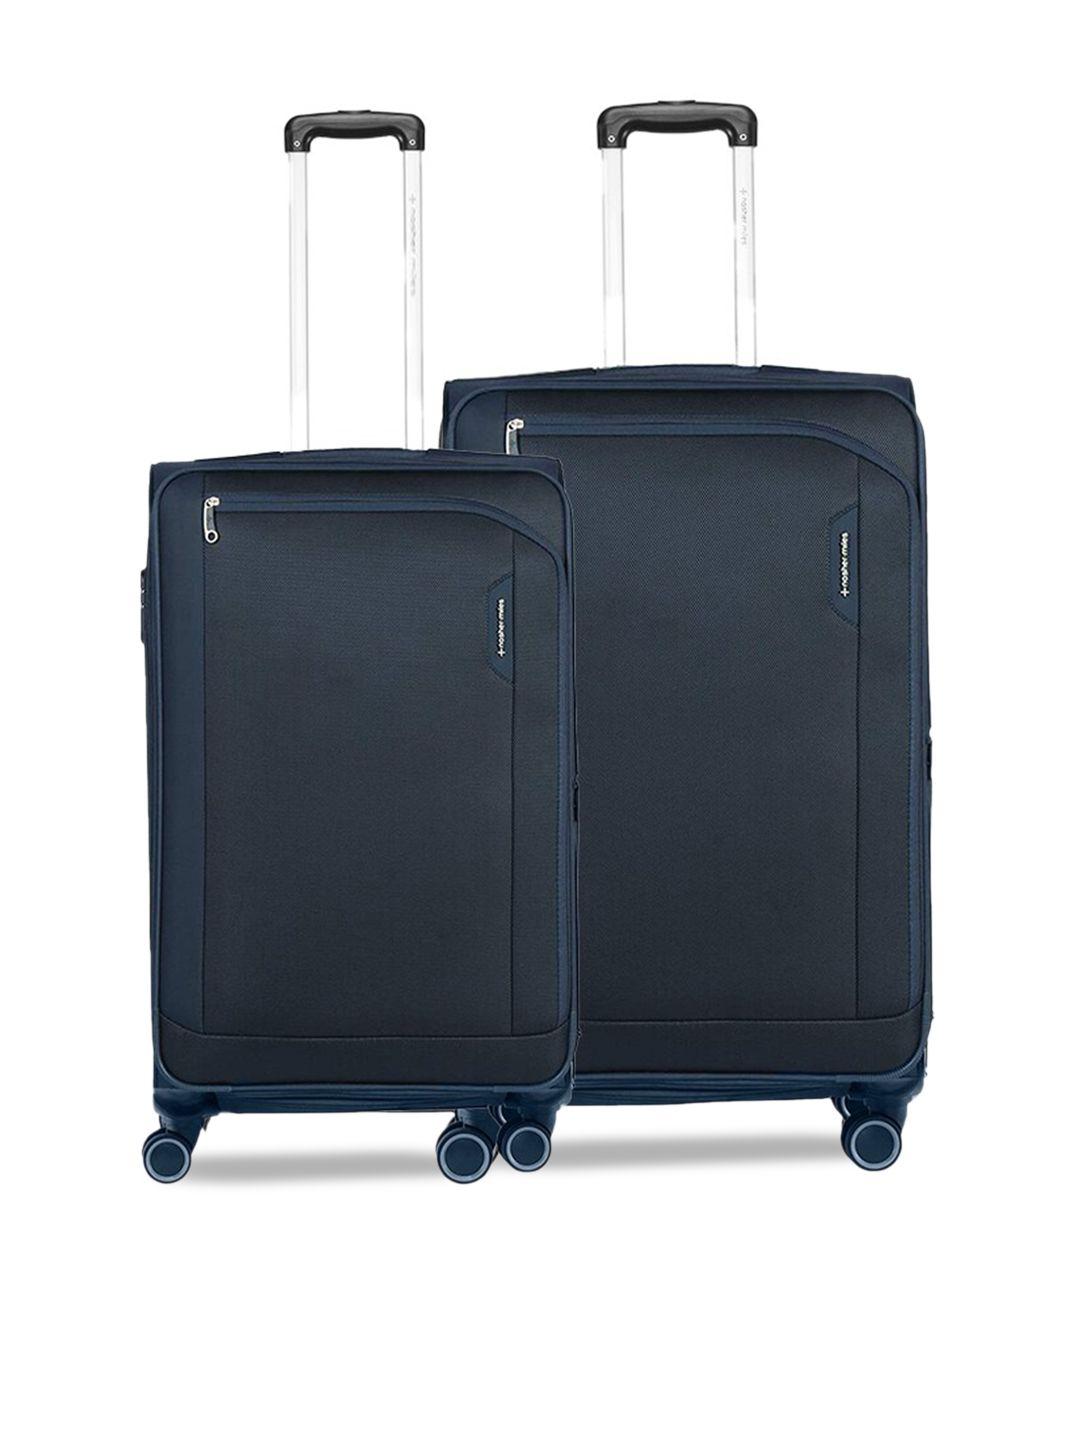 nasher miles dallas expander set of 2 soft-sided travel trolley suitcase